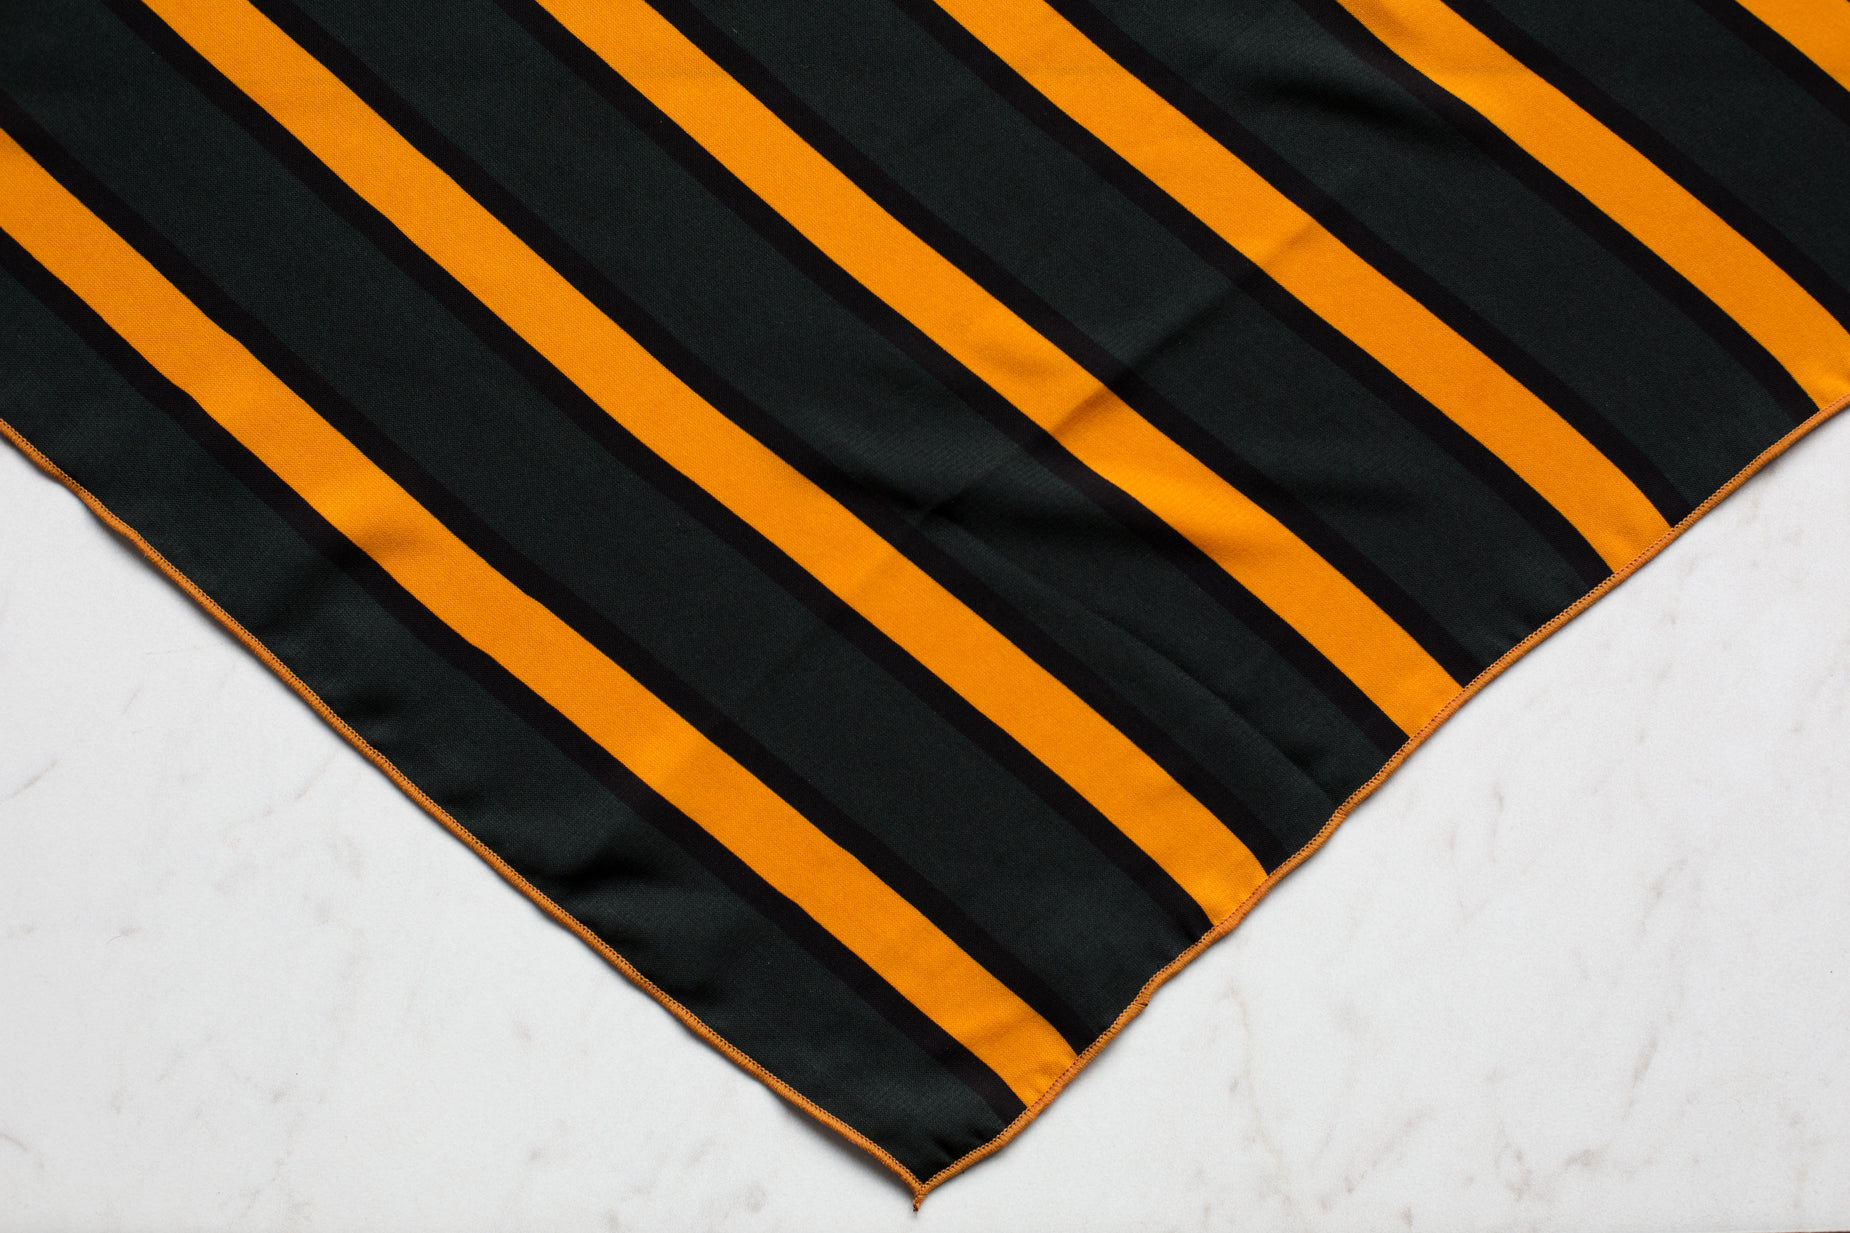 a black and gold striped table runner on a white marble surface